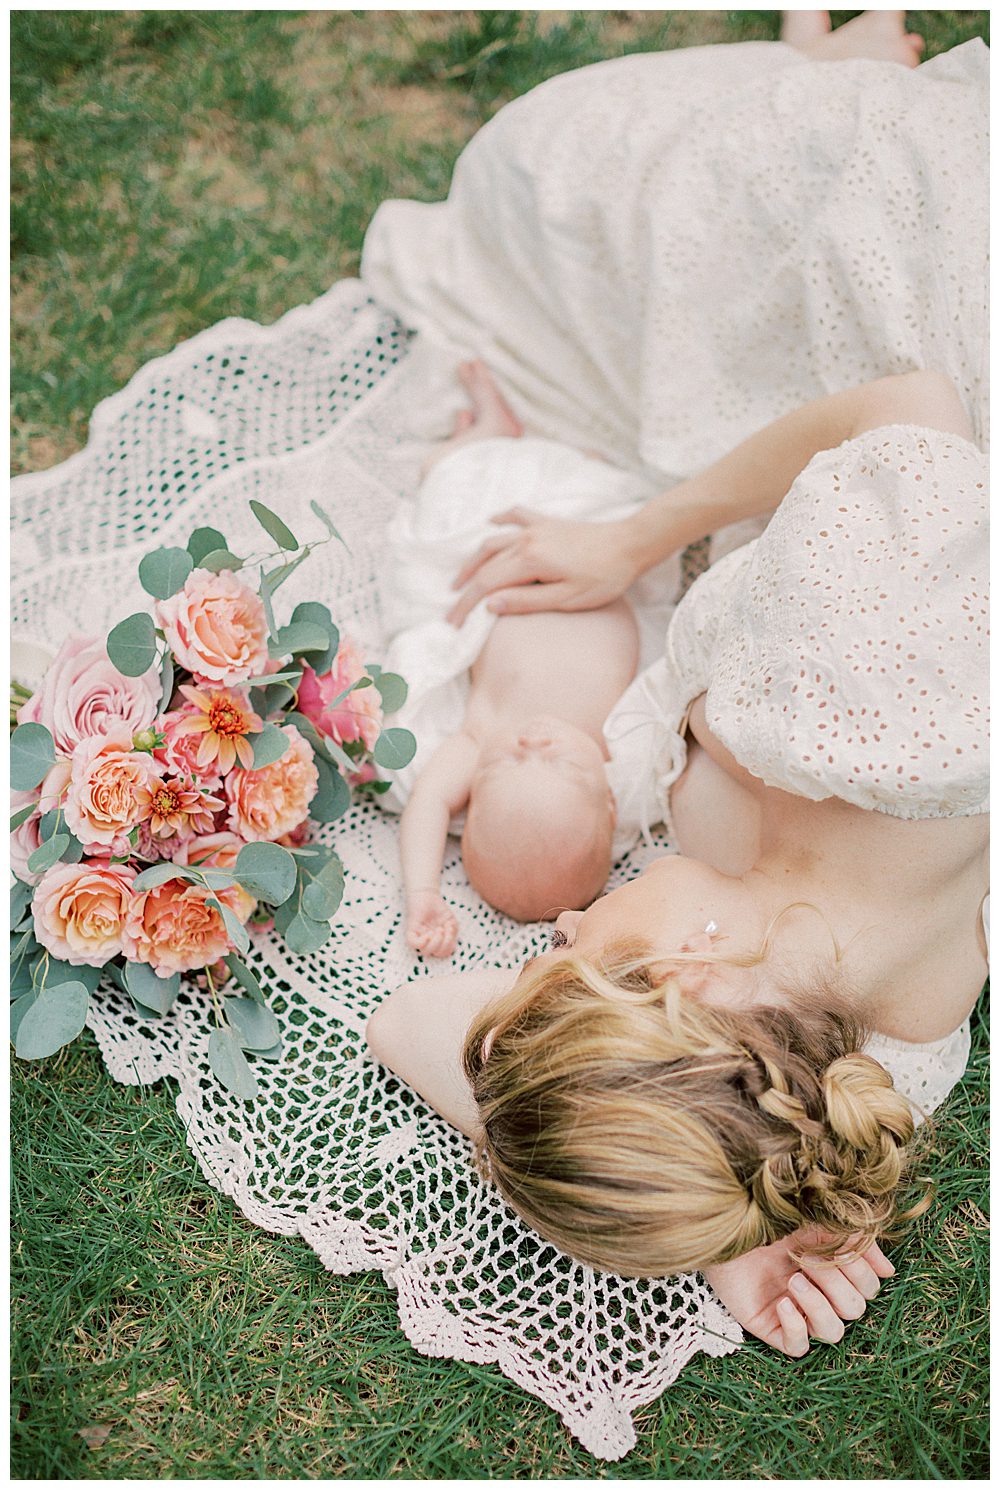 Blonde mother lays on crotchet blanket with newborn baby and roses.